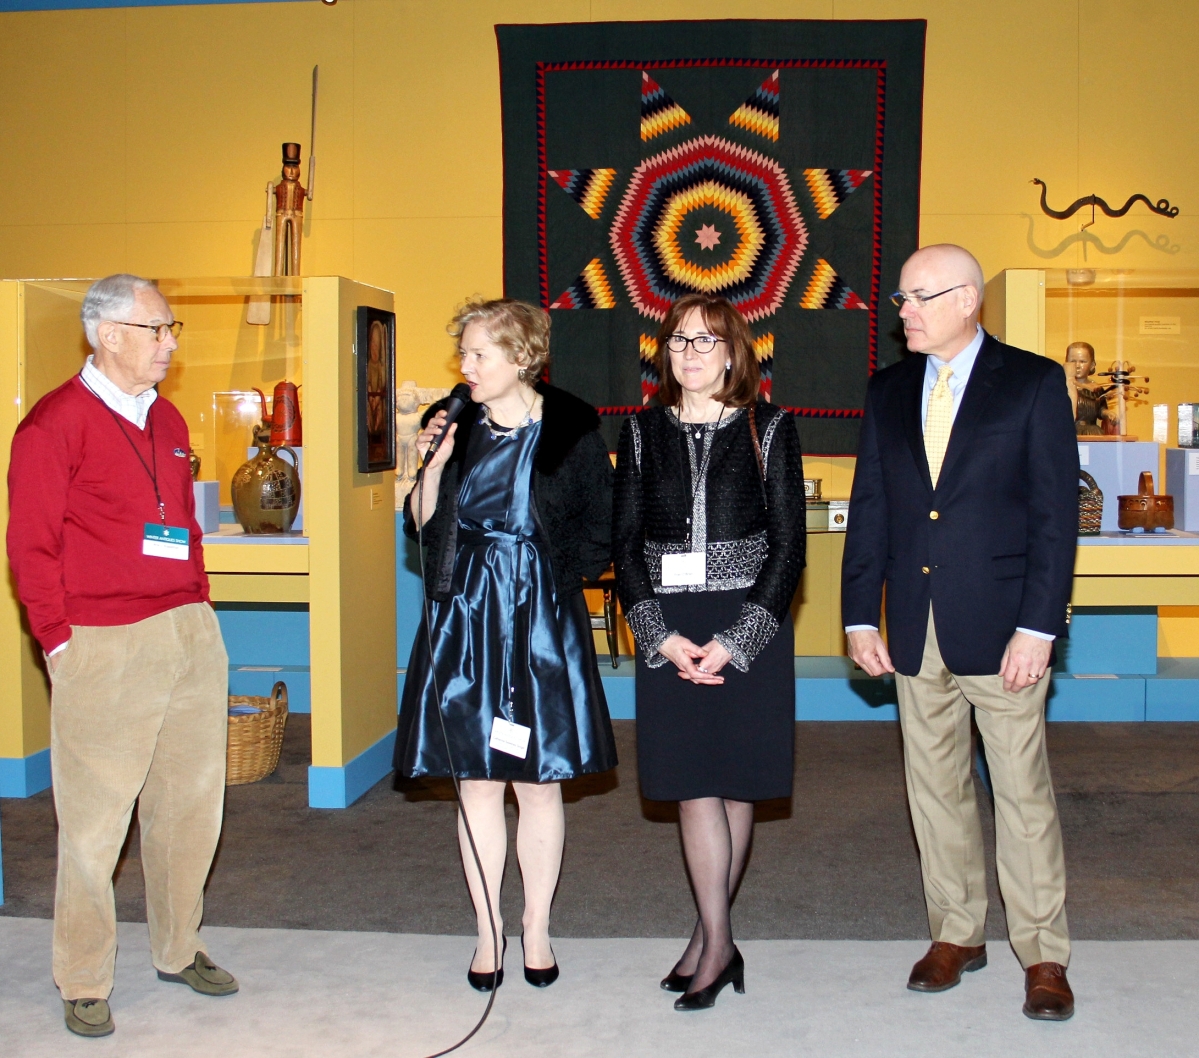 The 2017 loan exhibit celebrates the 60th anniversary of the Abby Aldrich Rockefeller Folk Art Museum at Colonial Williamsburg. From left, Winter Antiques Show chairman Arie Kopelman, executive director of the show, Catherine Sweeney Singer, Chubb North America division president Fran O’Brien and Ronald L. Hurst, chief curator and vice president of collections at Colonial Williamsburg.